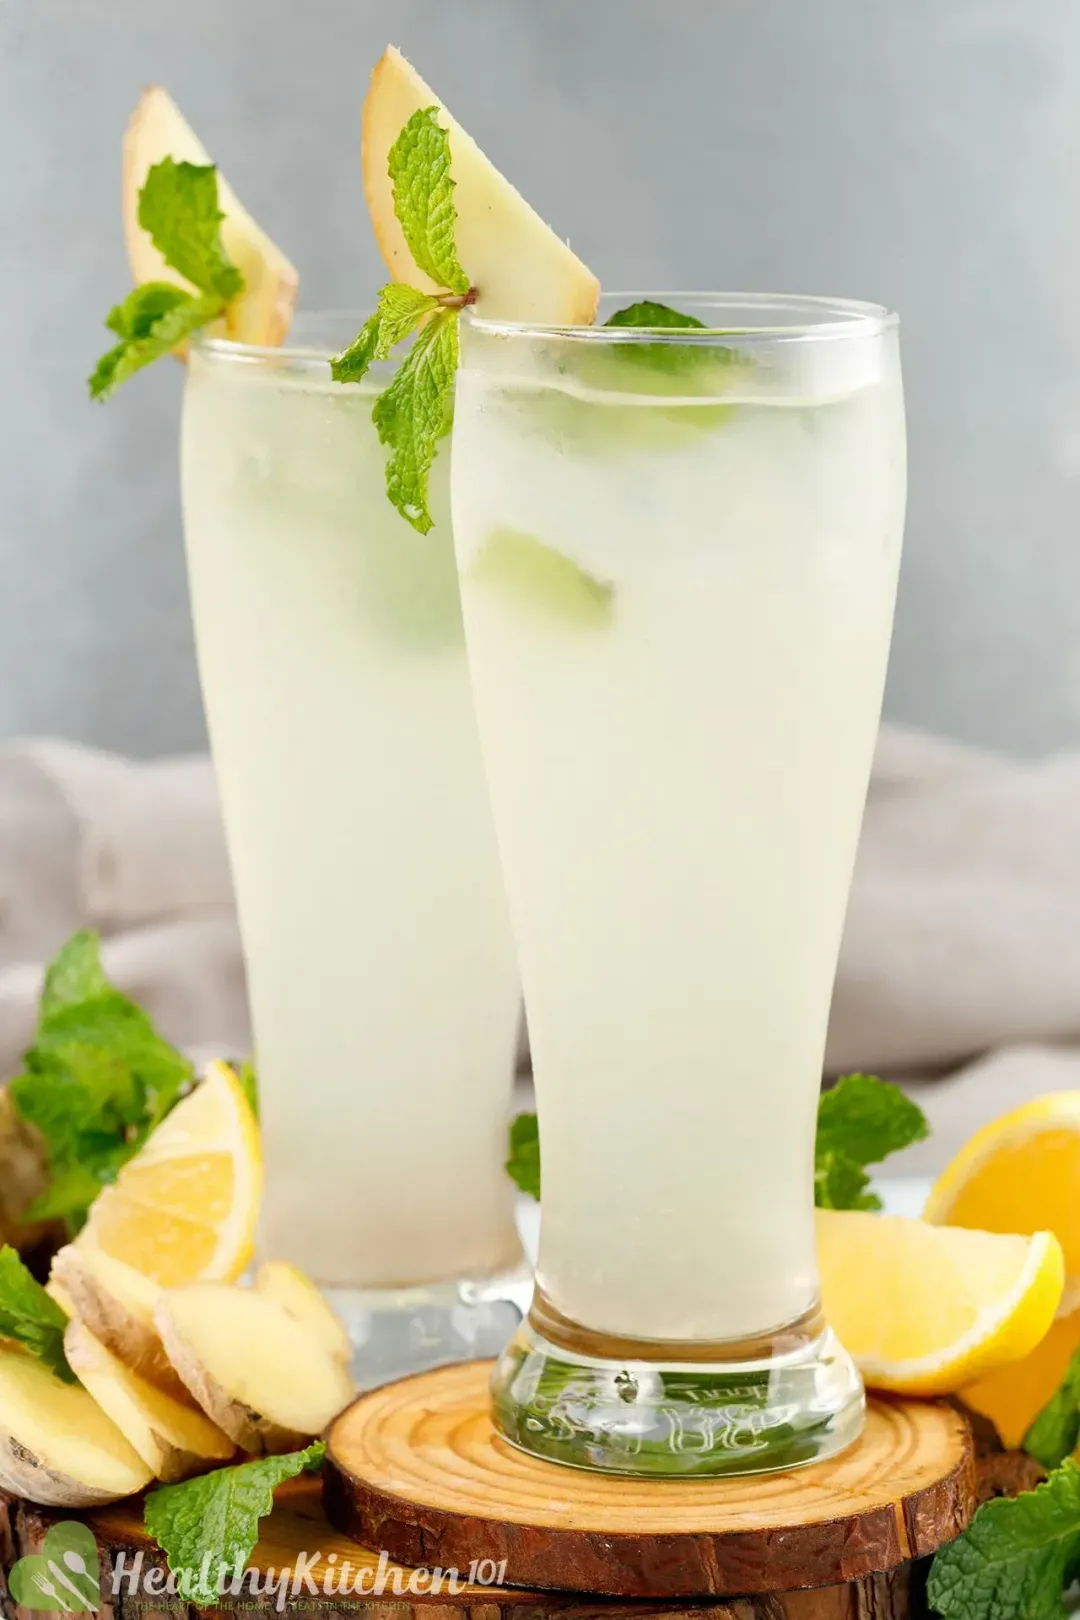 Two tall glasses of iced white lemonade garnished with mint leaves, lemon wedges, and ginger slices